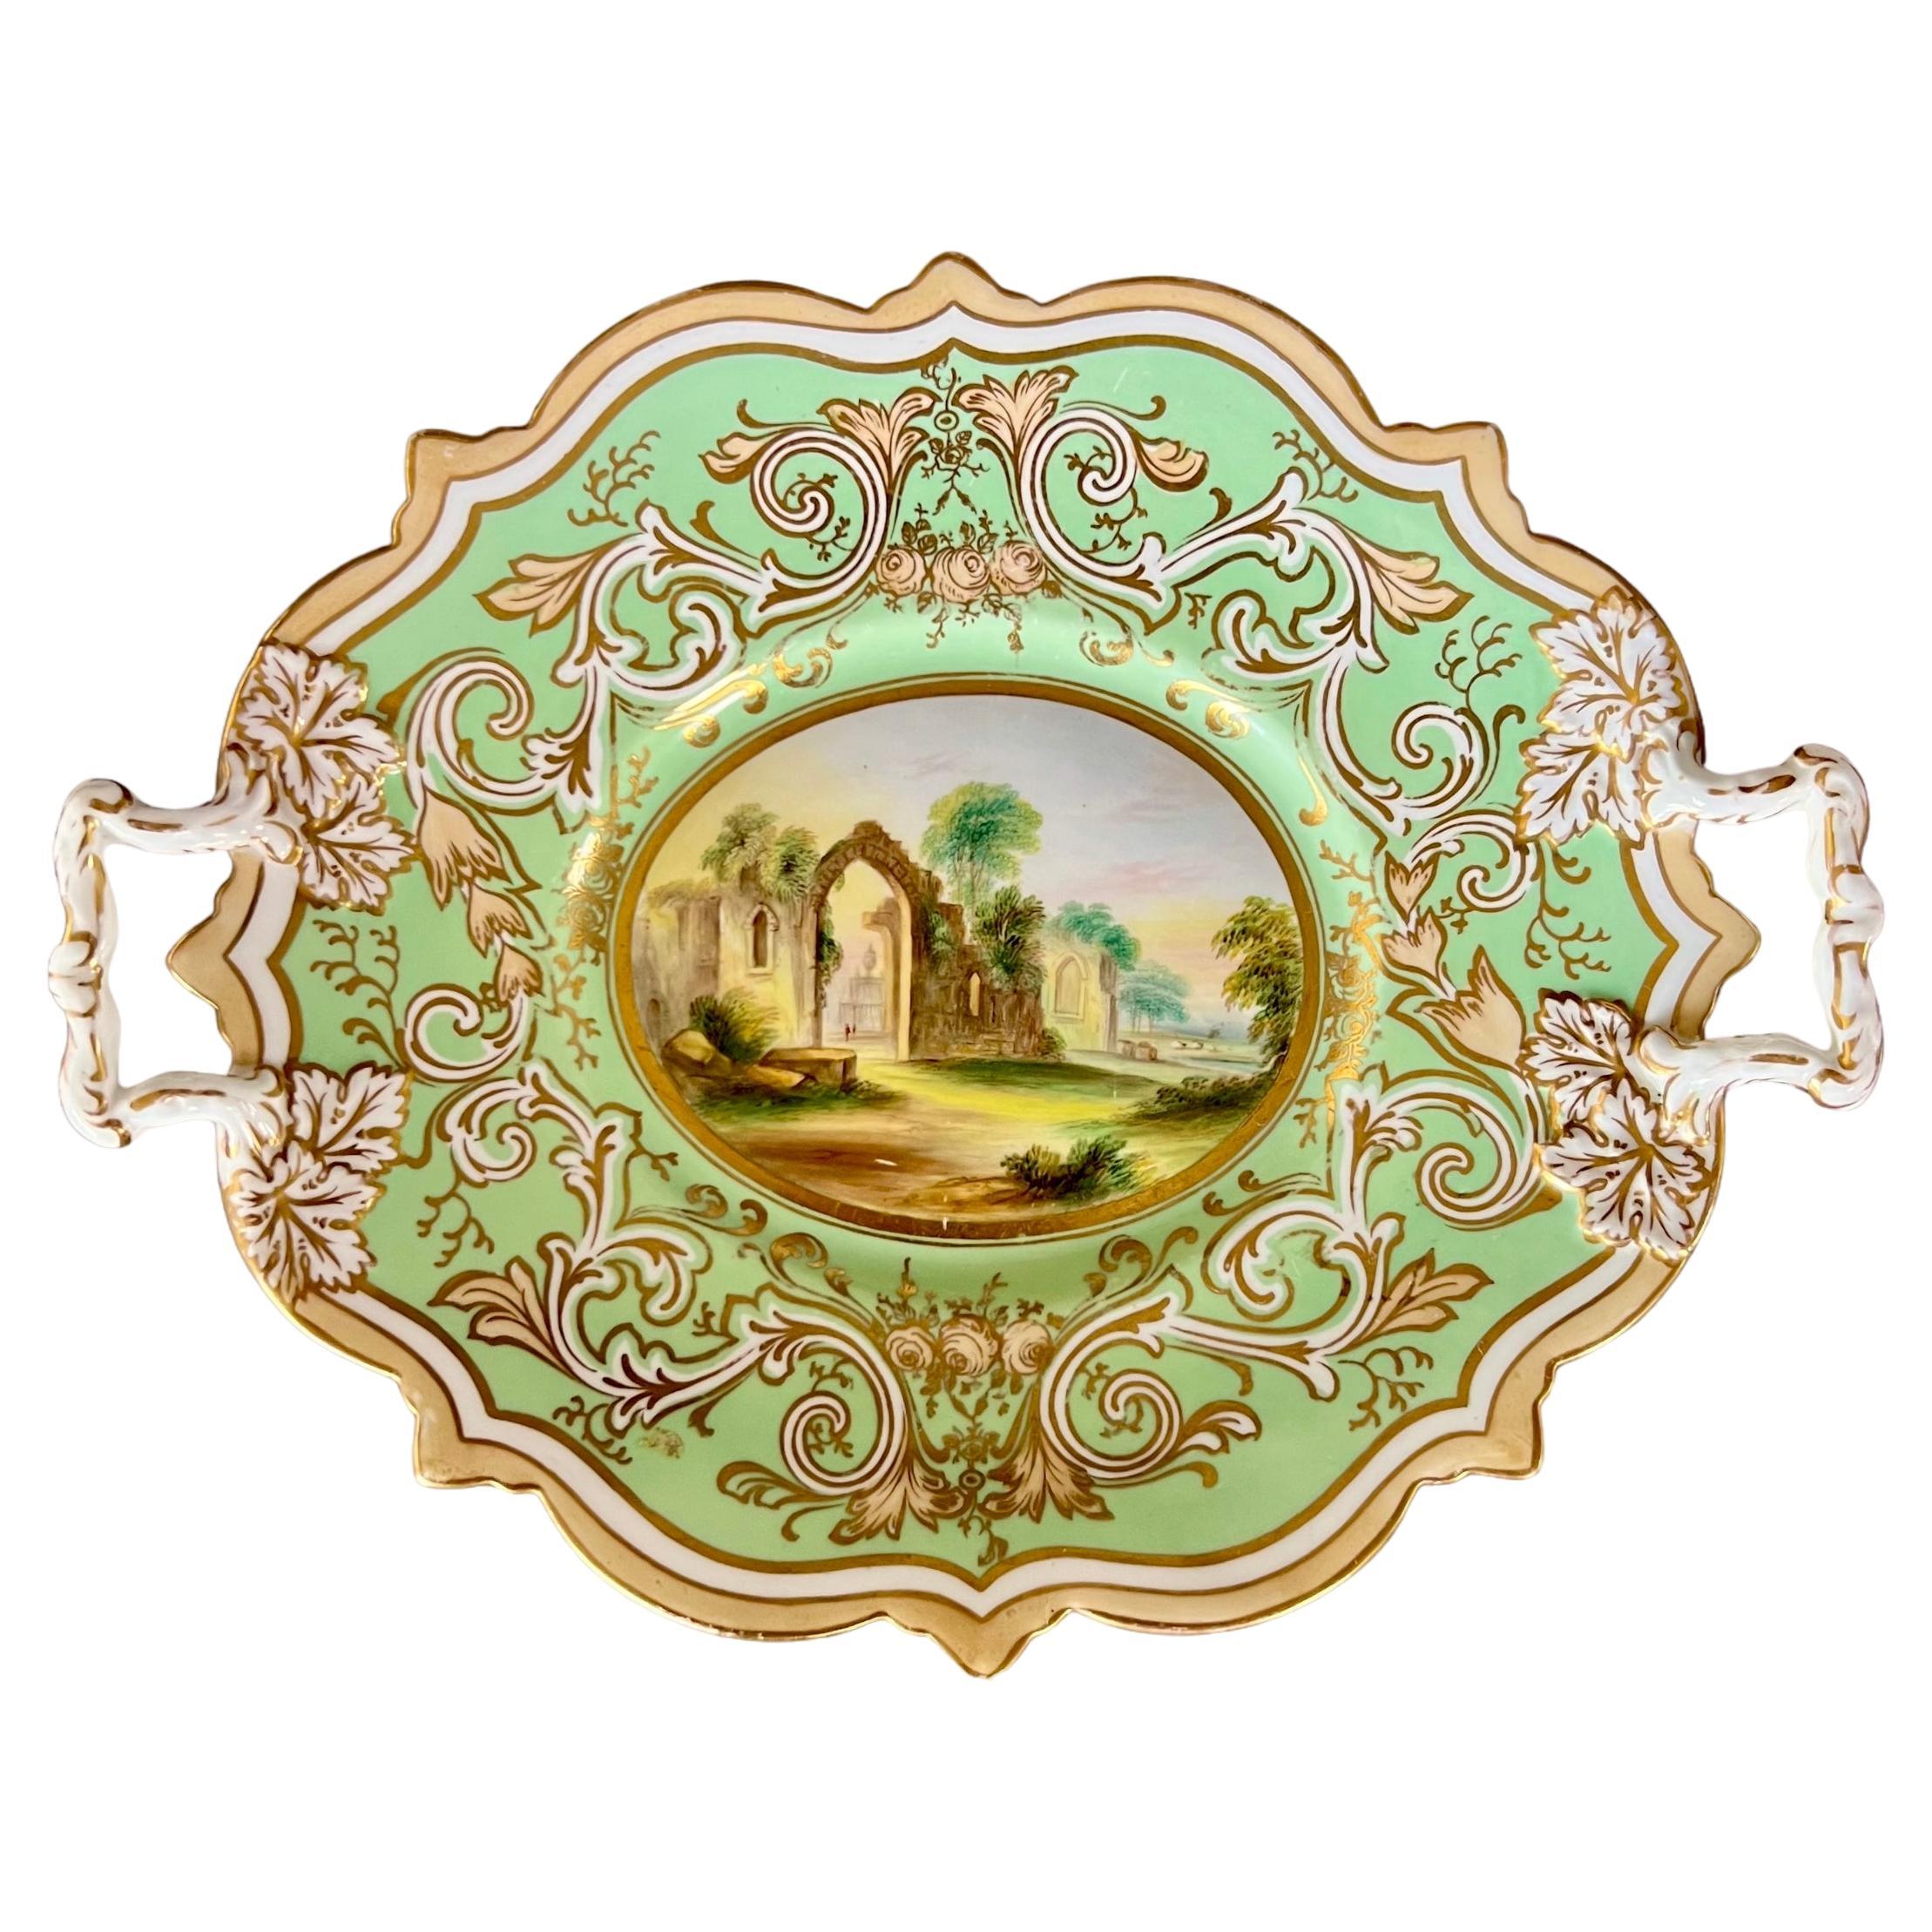 Samuel Alcock Low Oval Comport Dish, Sage Green with Landscape, ca 1850 For Sale